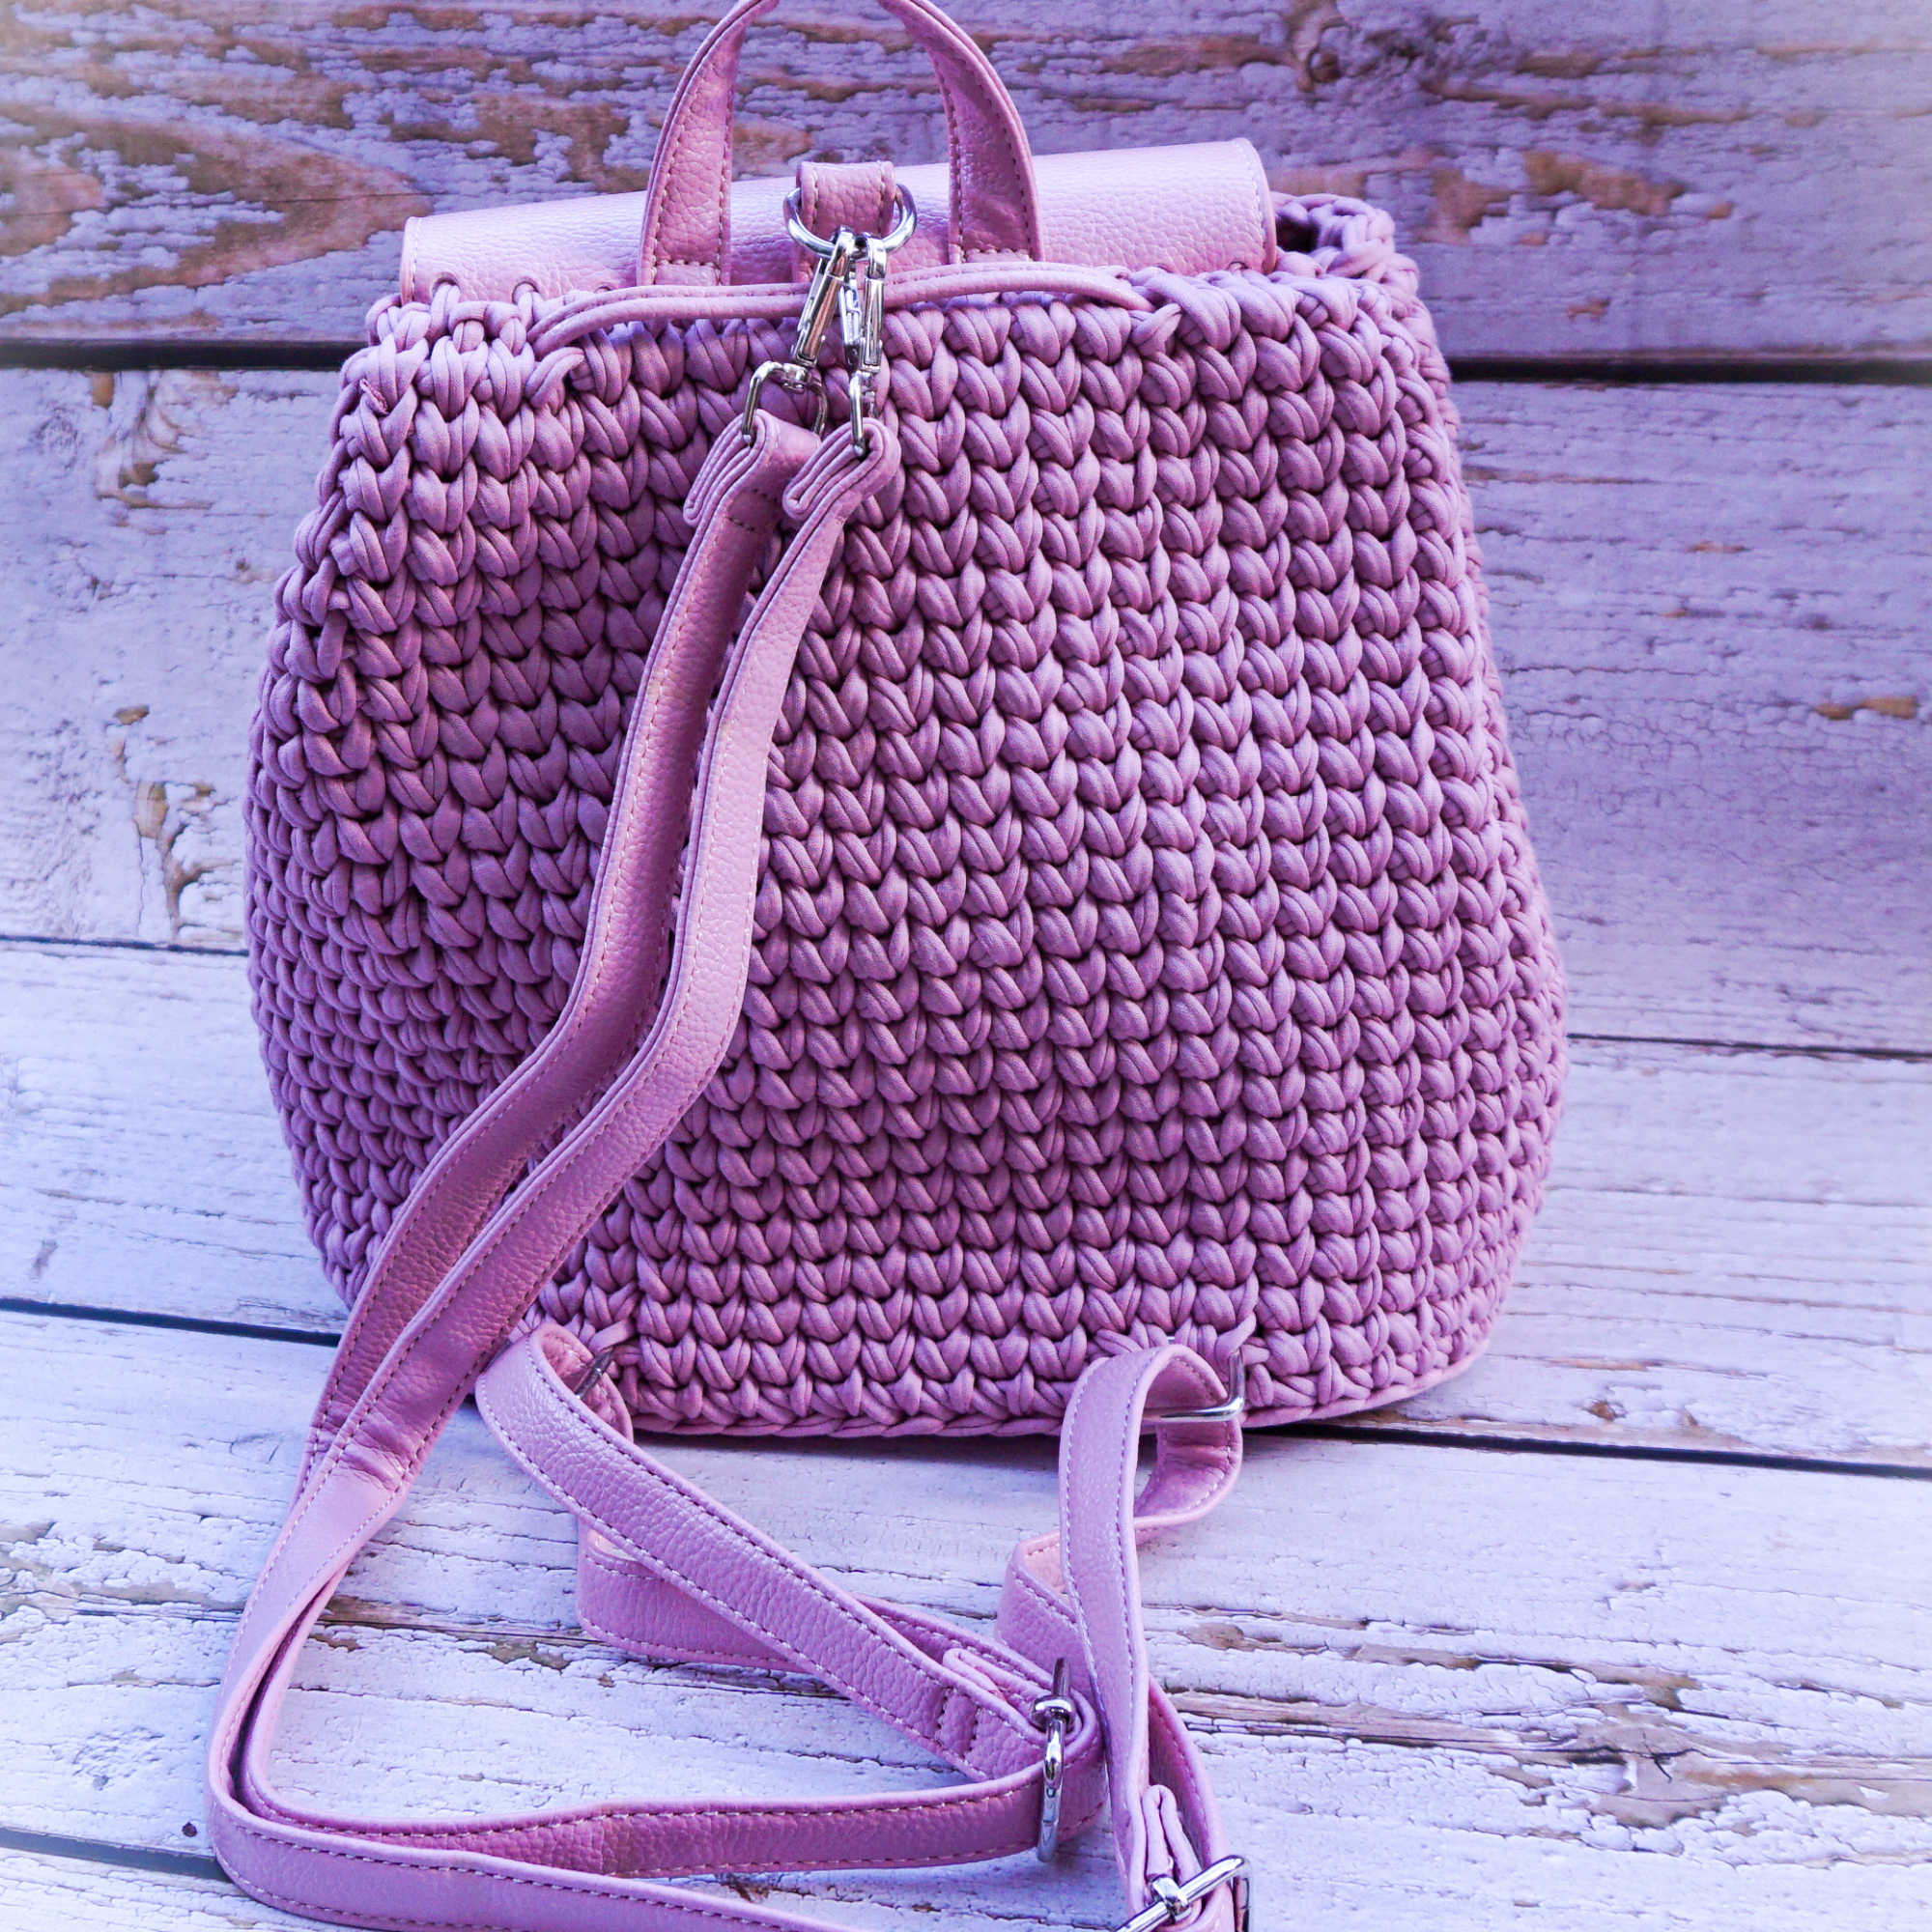 Ravelry: Backpack pattern by Raine Eimre